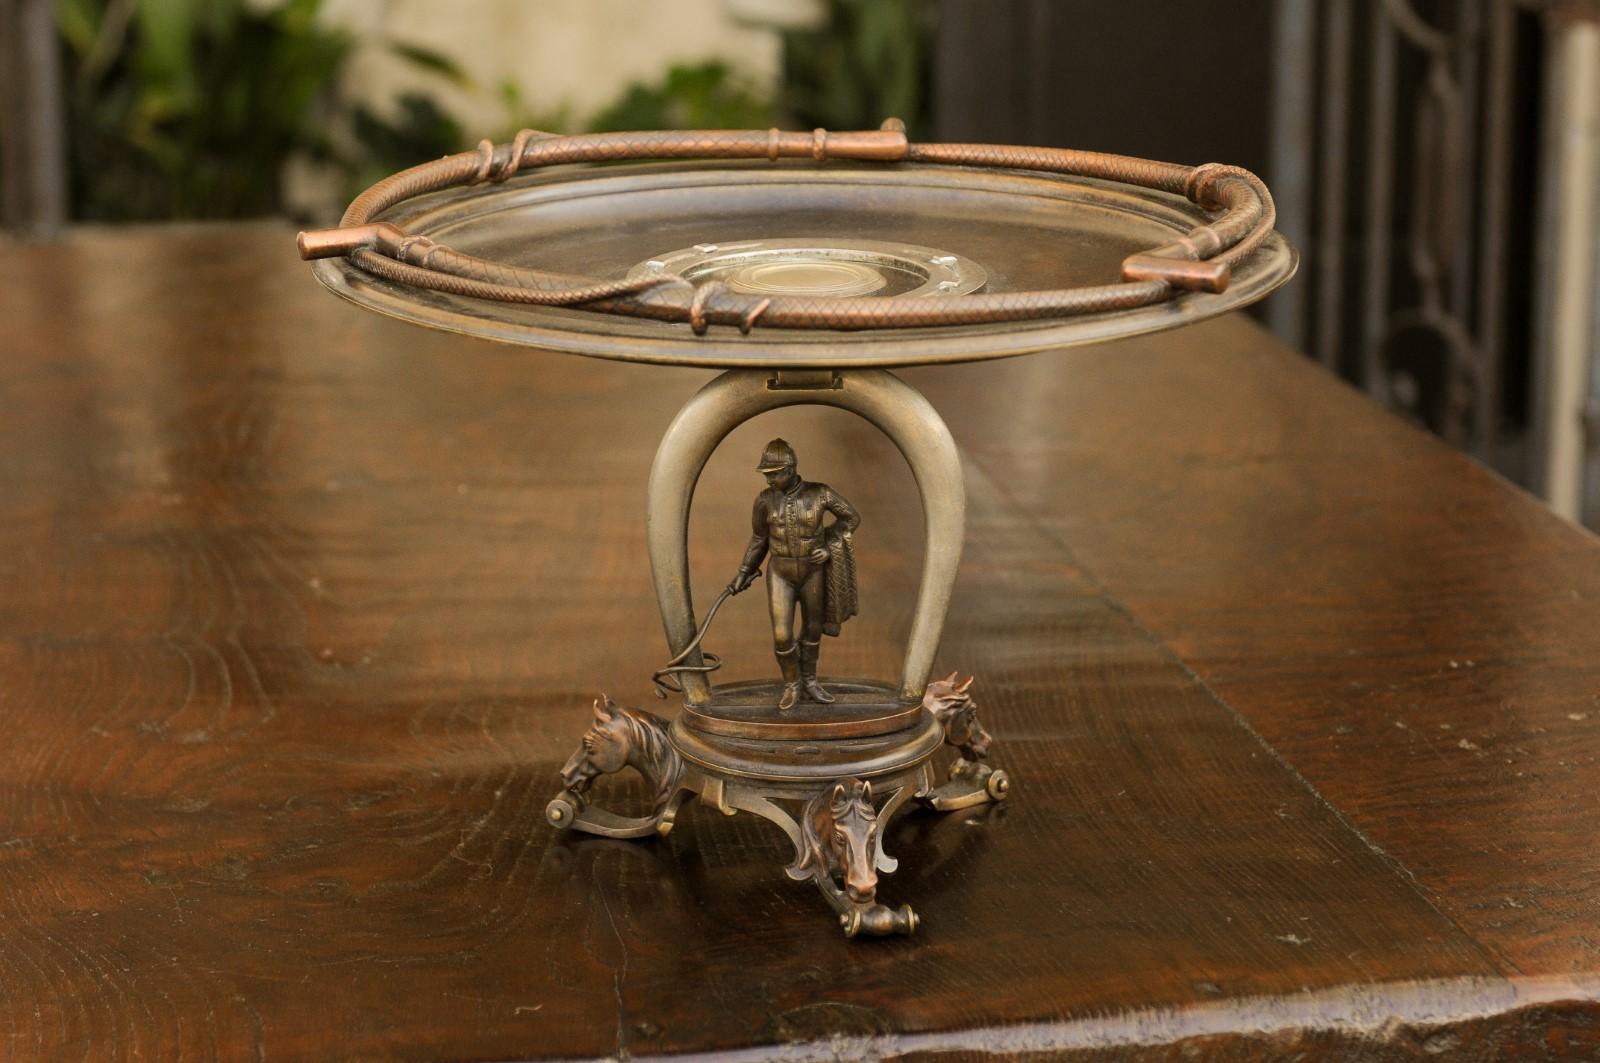 A Tiffany Studios bronze tazza from the early 20th century, with equestrian motifs. Born in second decade of the 20th century, this exquisite bronze tazza features a circular bowl, adorned with a flat horseshoe in its centre and whips on its trime.